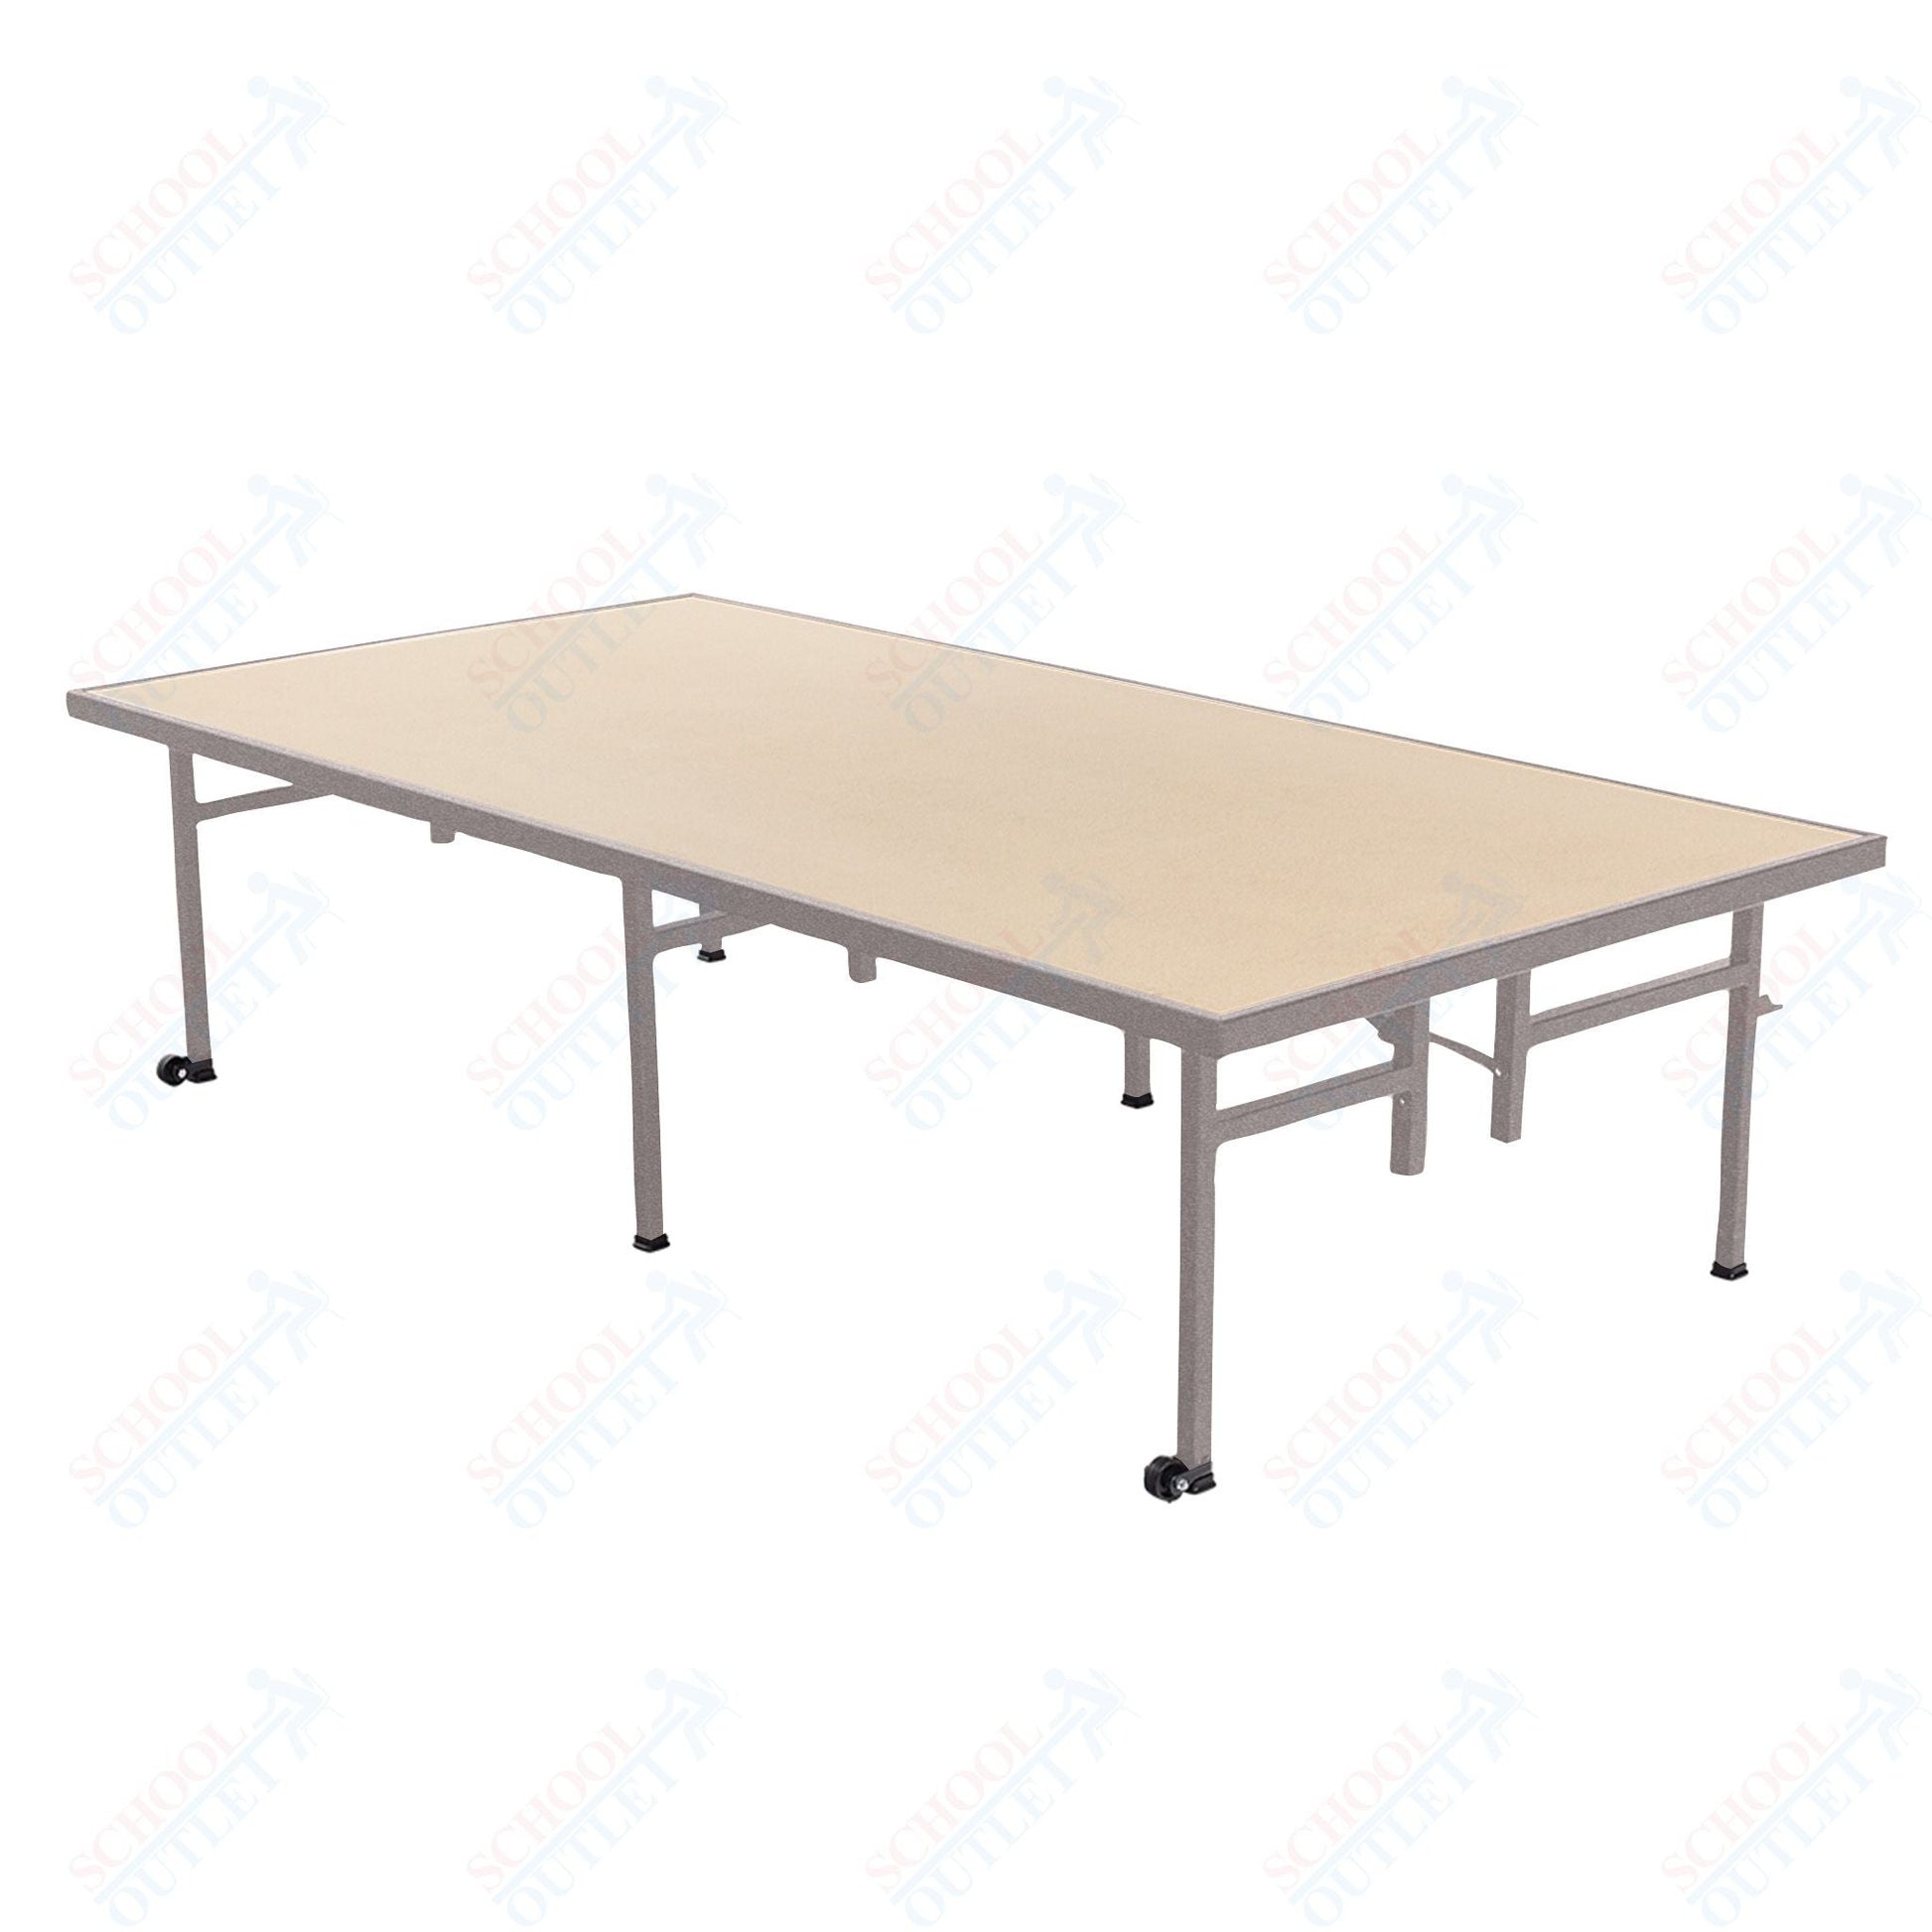 AmTab Fixed Height Stage - Hardboard Top - 36"W x 48"L x 8"H (AmTab AMT - ST3408H) - SchoolOutlet